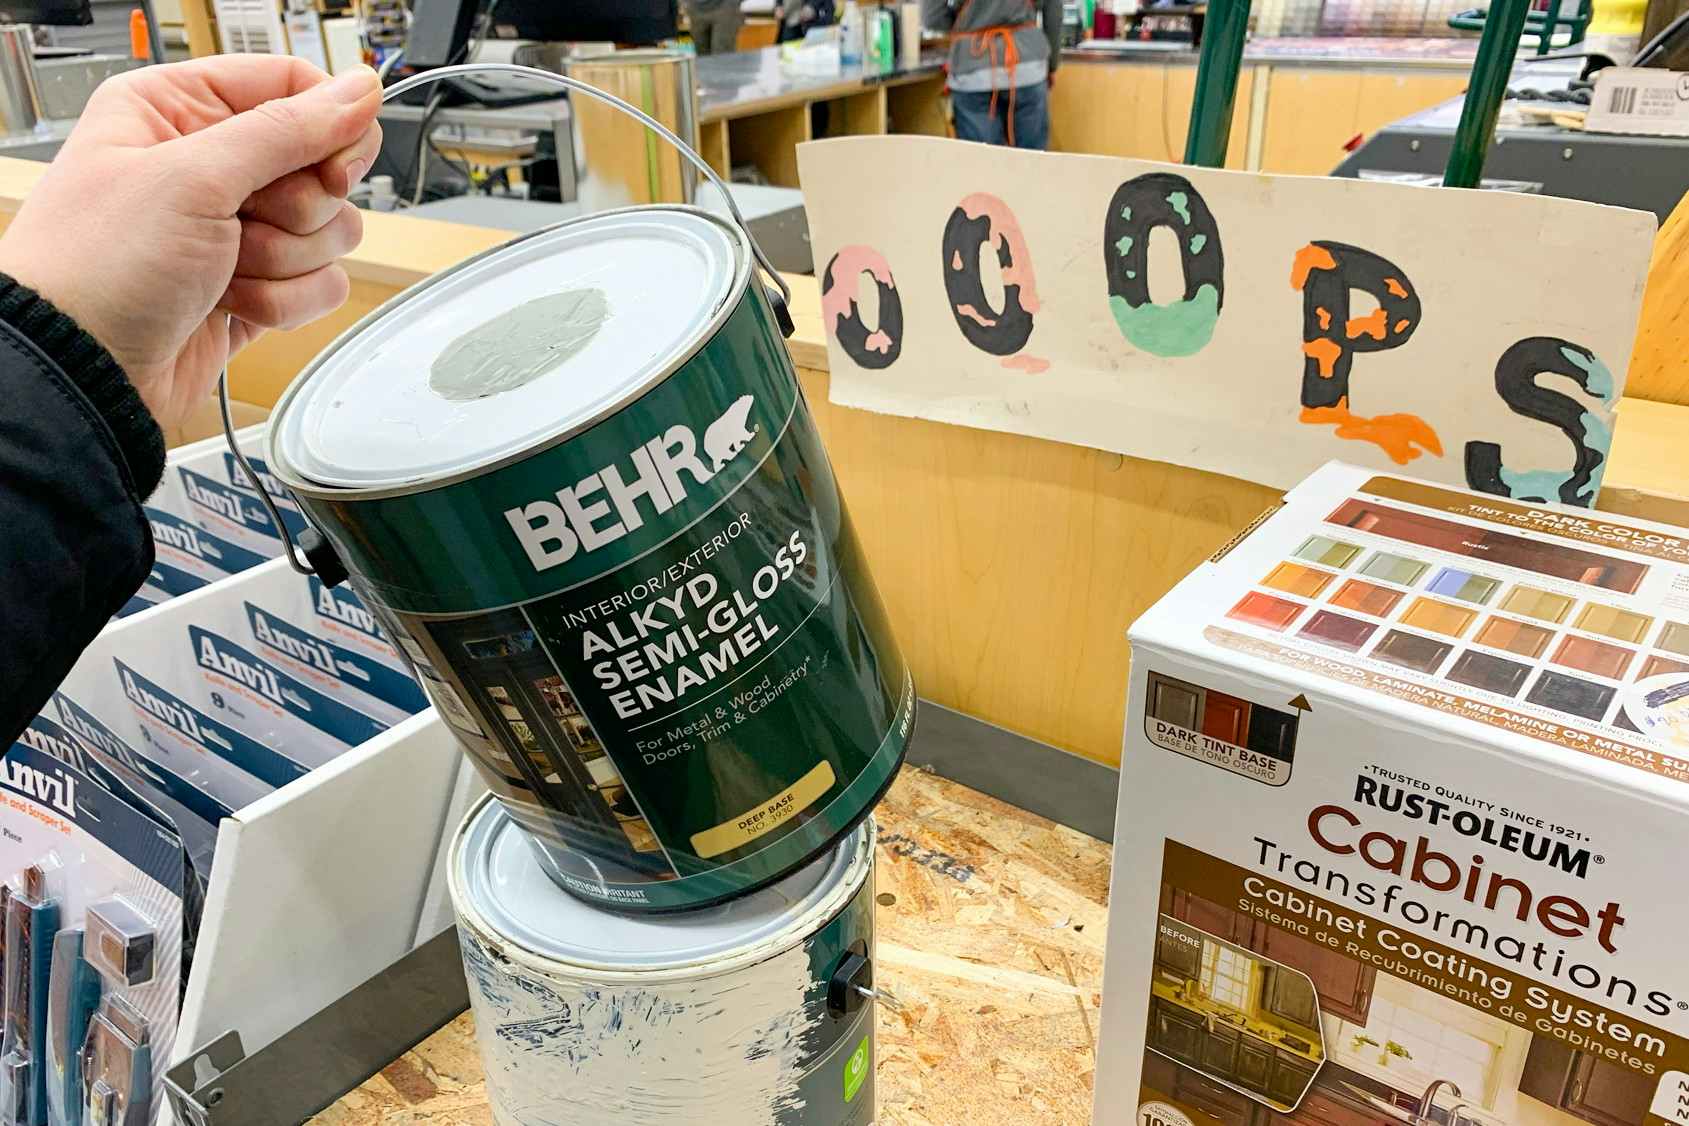 A person holding a gallon can of Behr paint